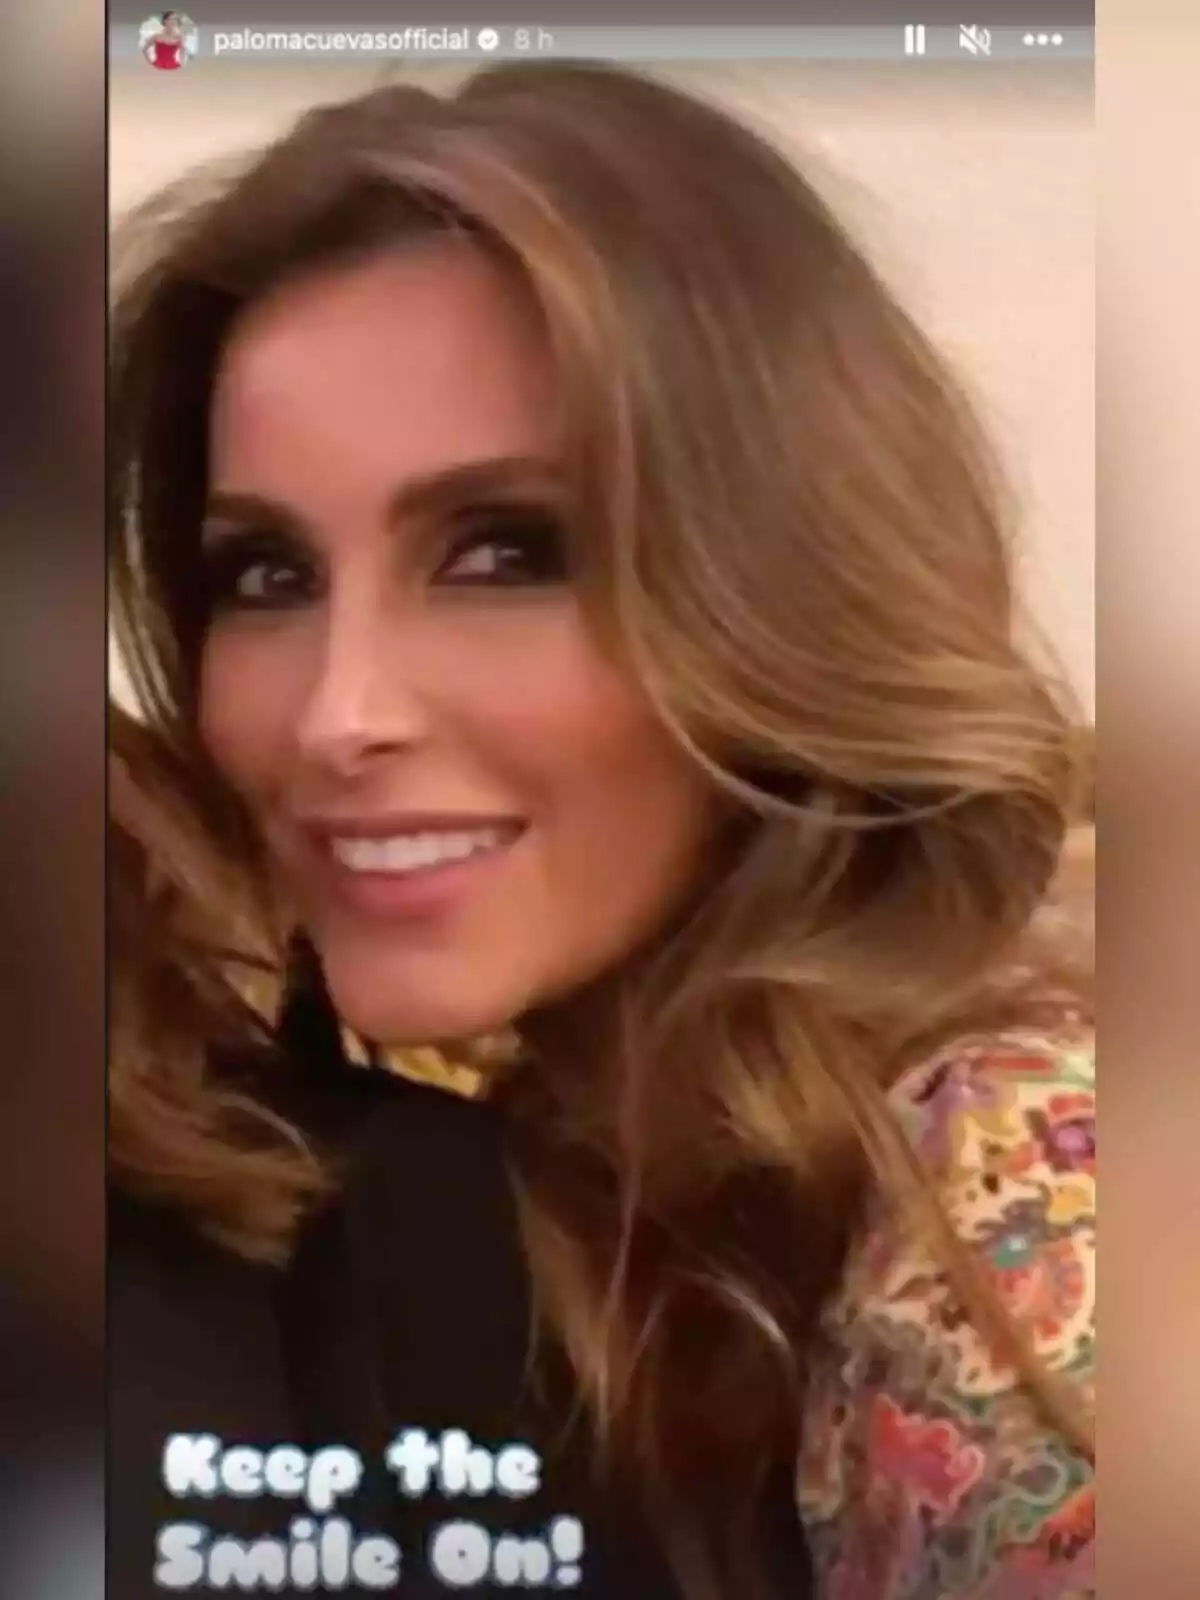 The story of Paloma Cuevas posing, smiling, and winking at Luis Miguel